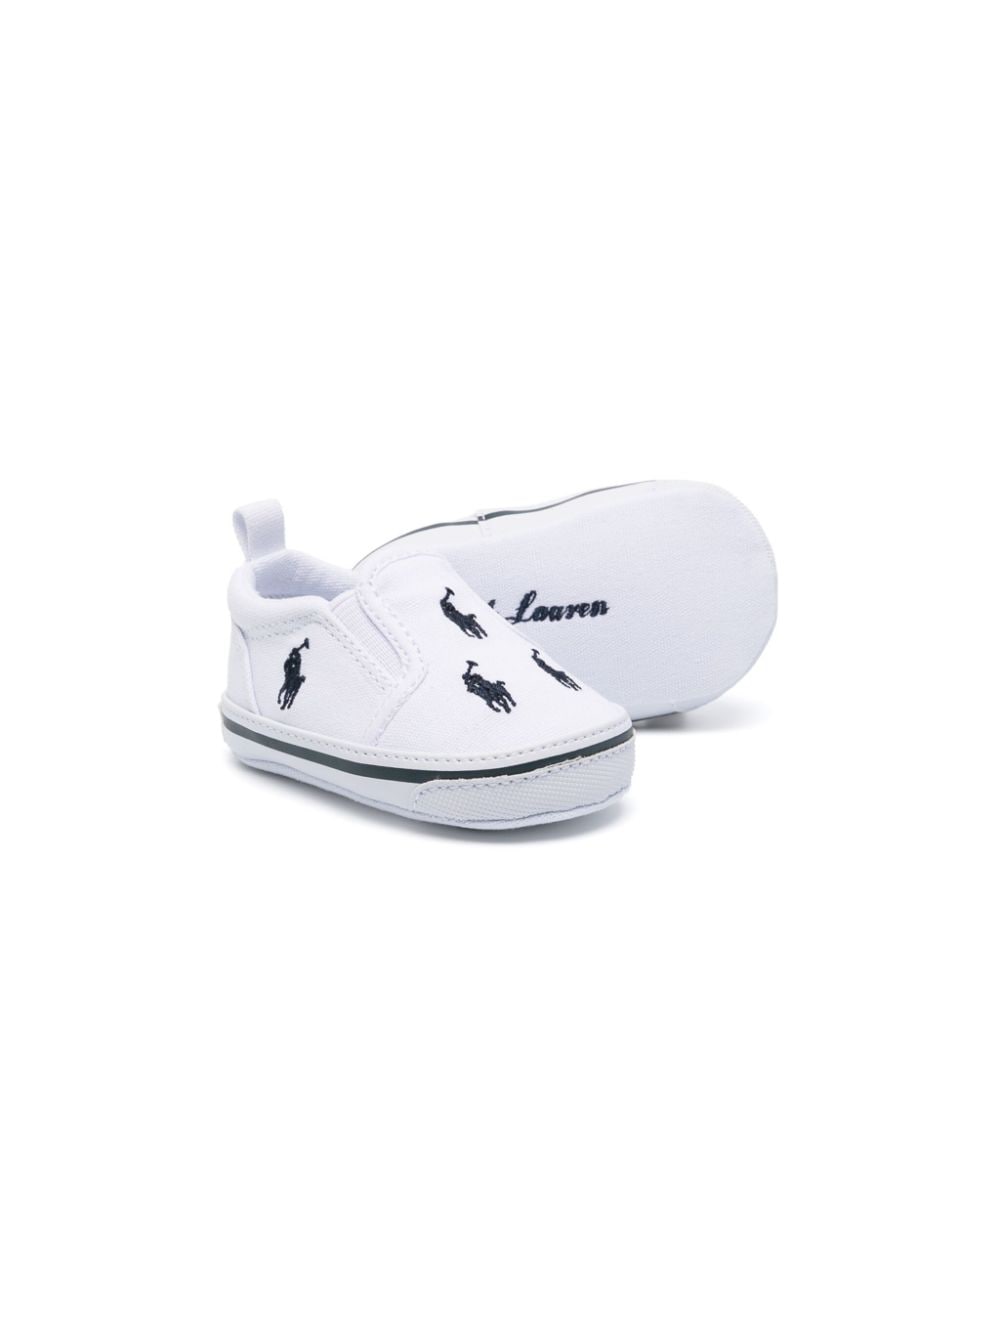 White sneakers for newborns with all-over logo